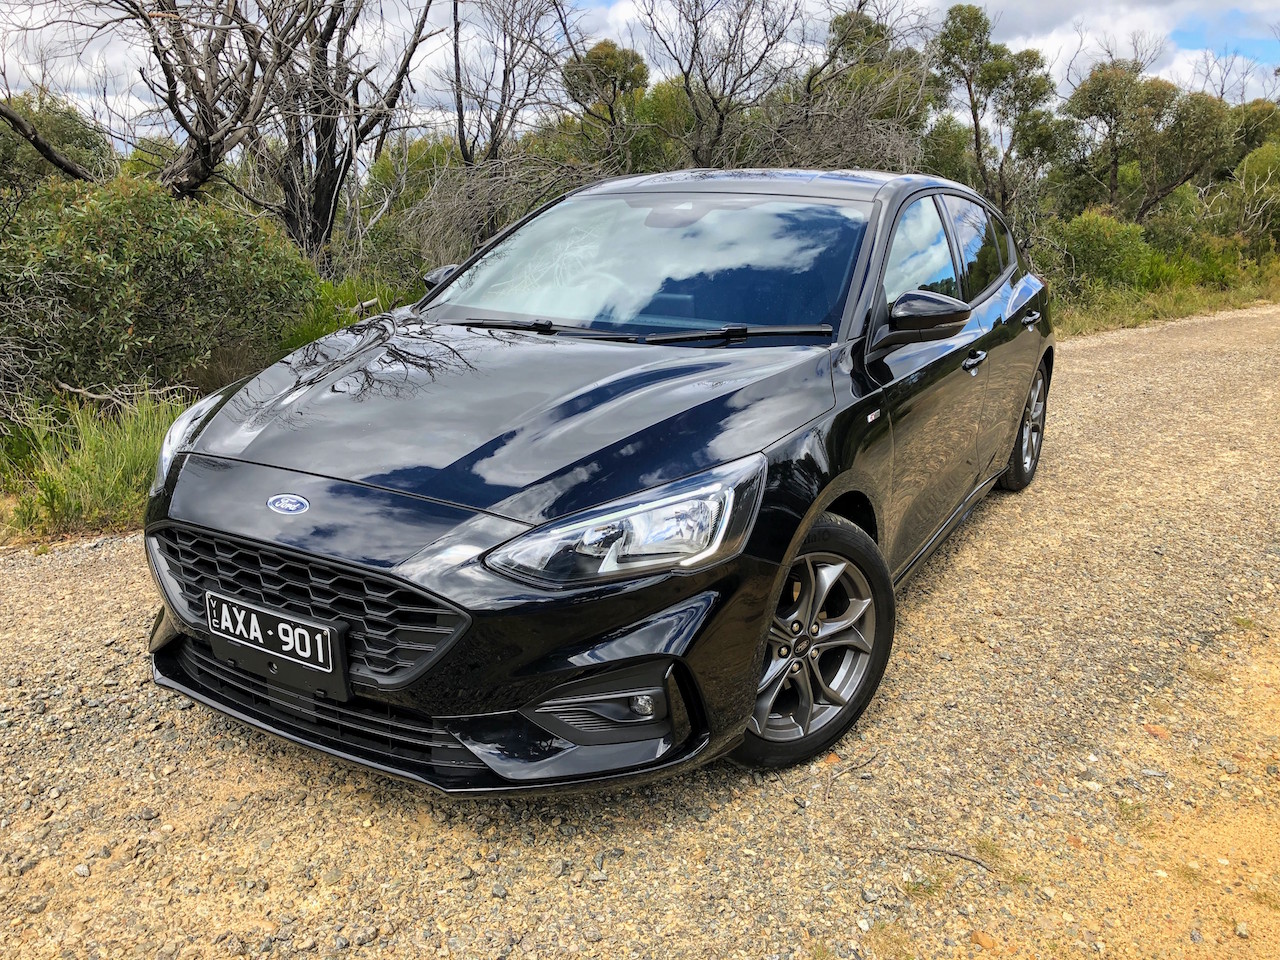 First Drive: 2021 Ford Focus ST Review